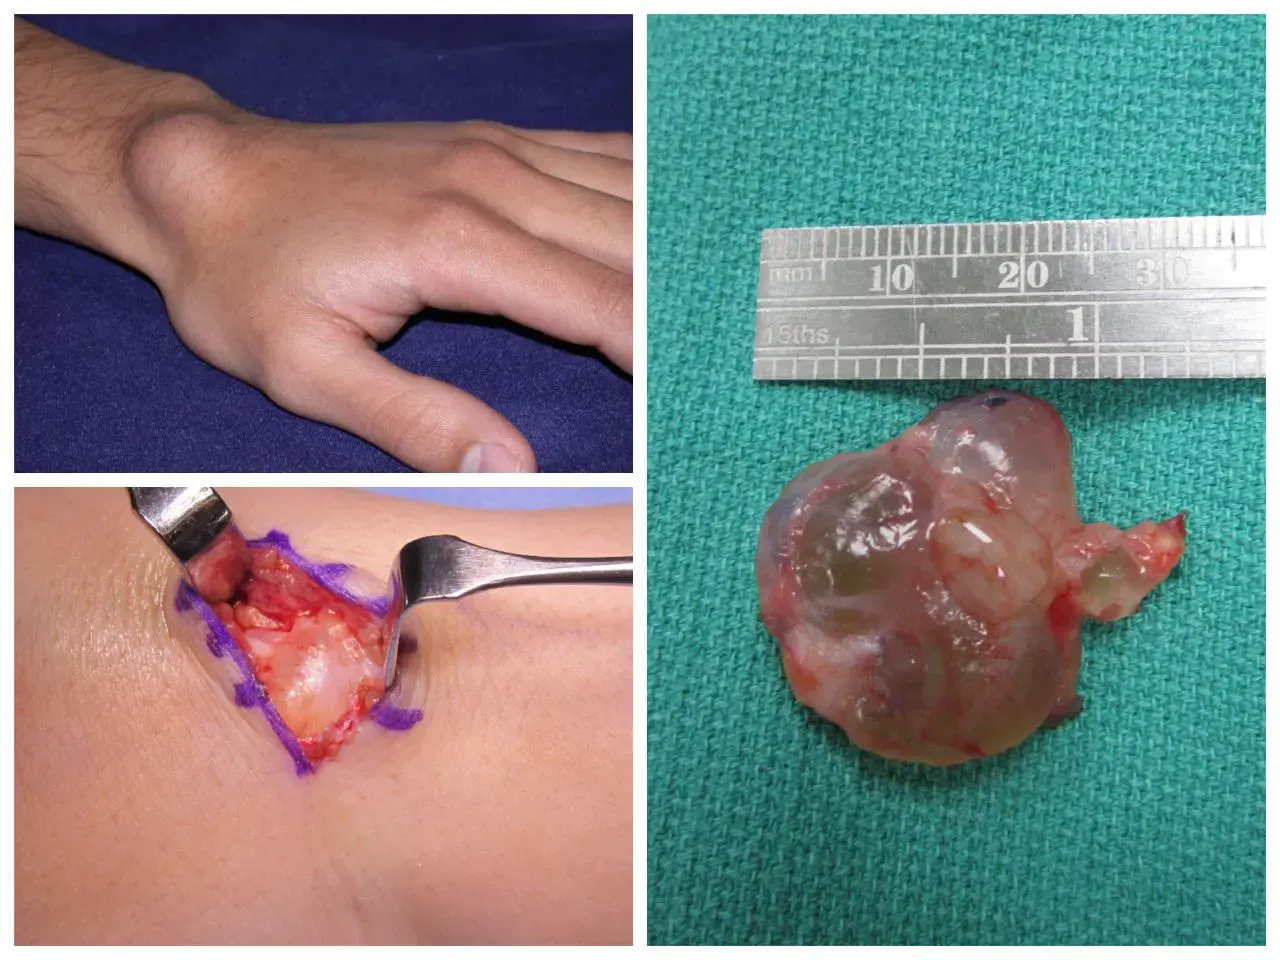 The image shows a ganglion cyst after surgical removal